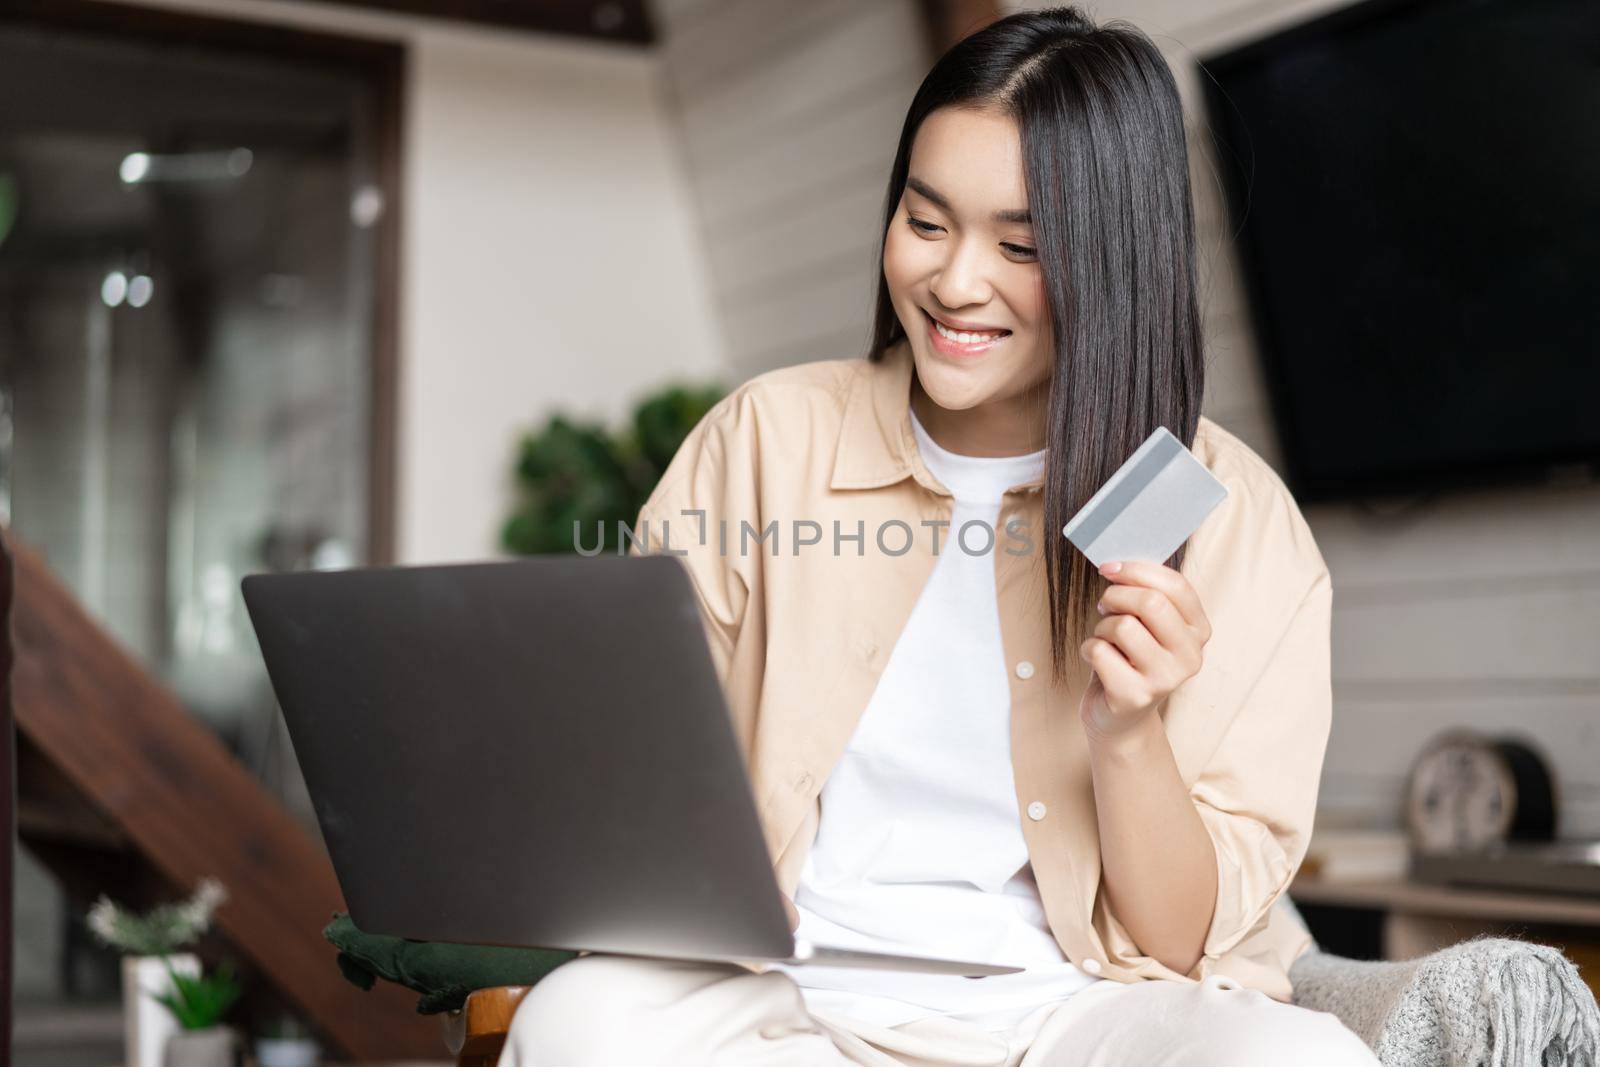 Asian girl paying for online purchase with credit card, using laptop, buying on website.